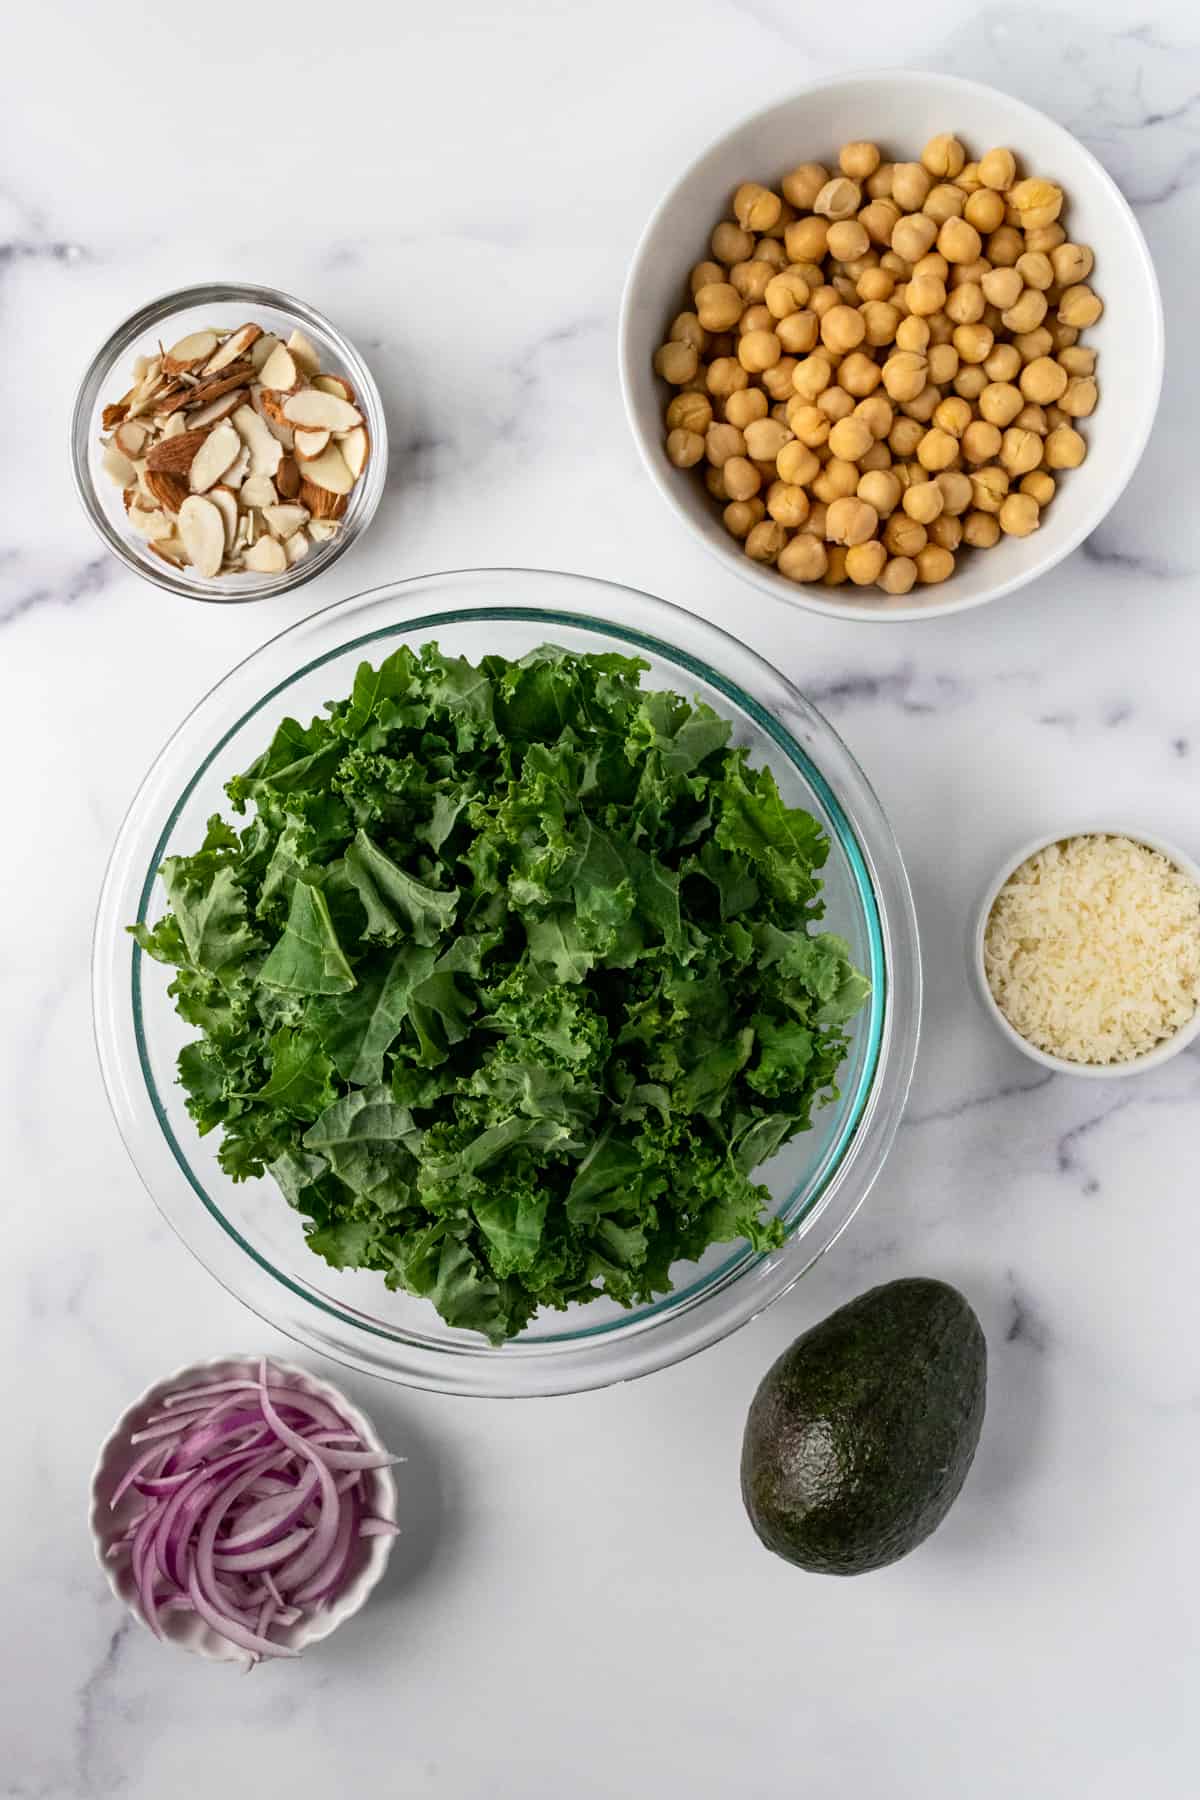 Ingredients including Kale, Chickpeas, sliced almonds, parmesan, avocado and red onion